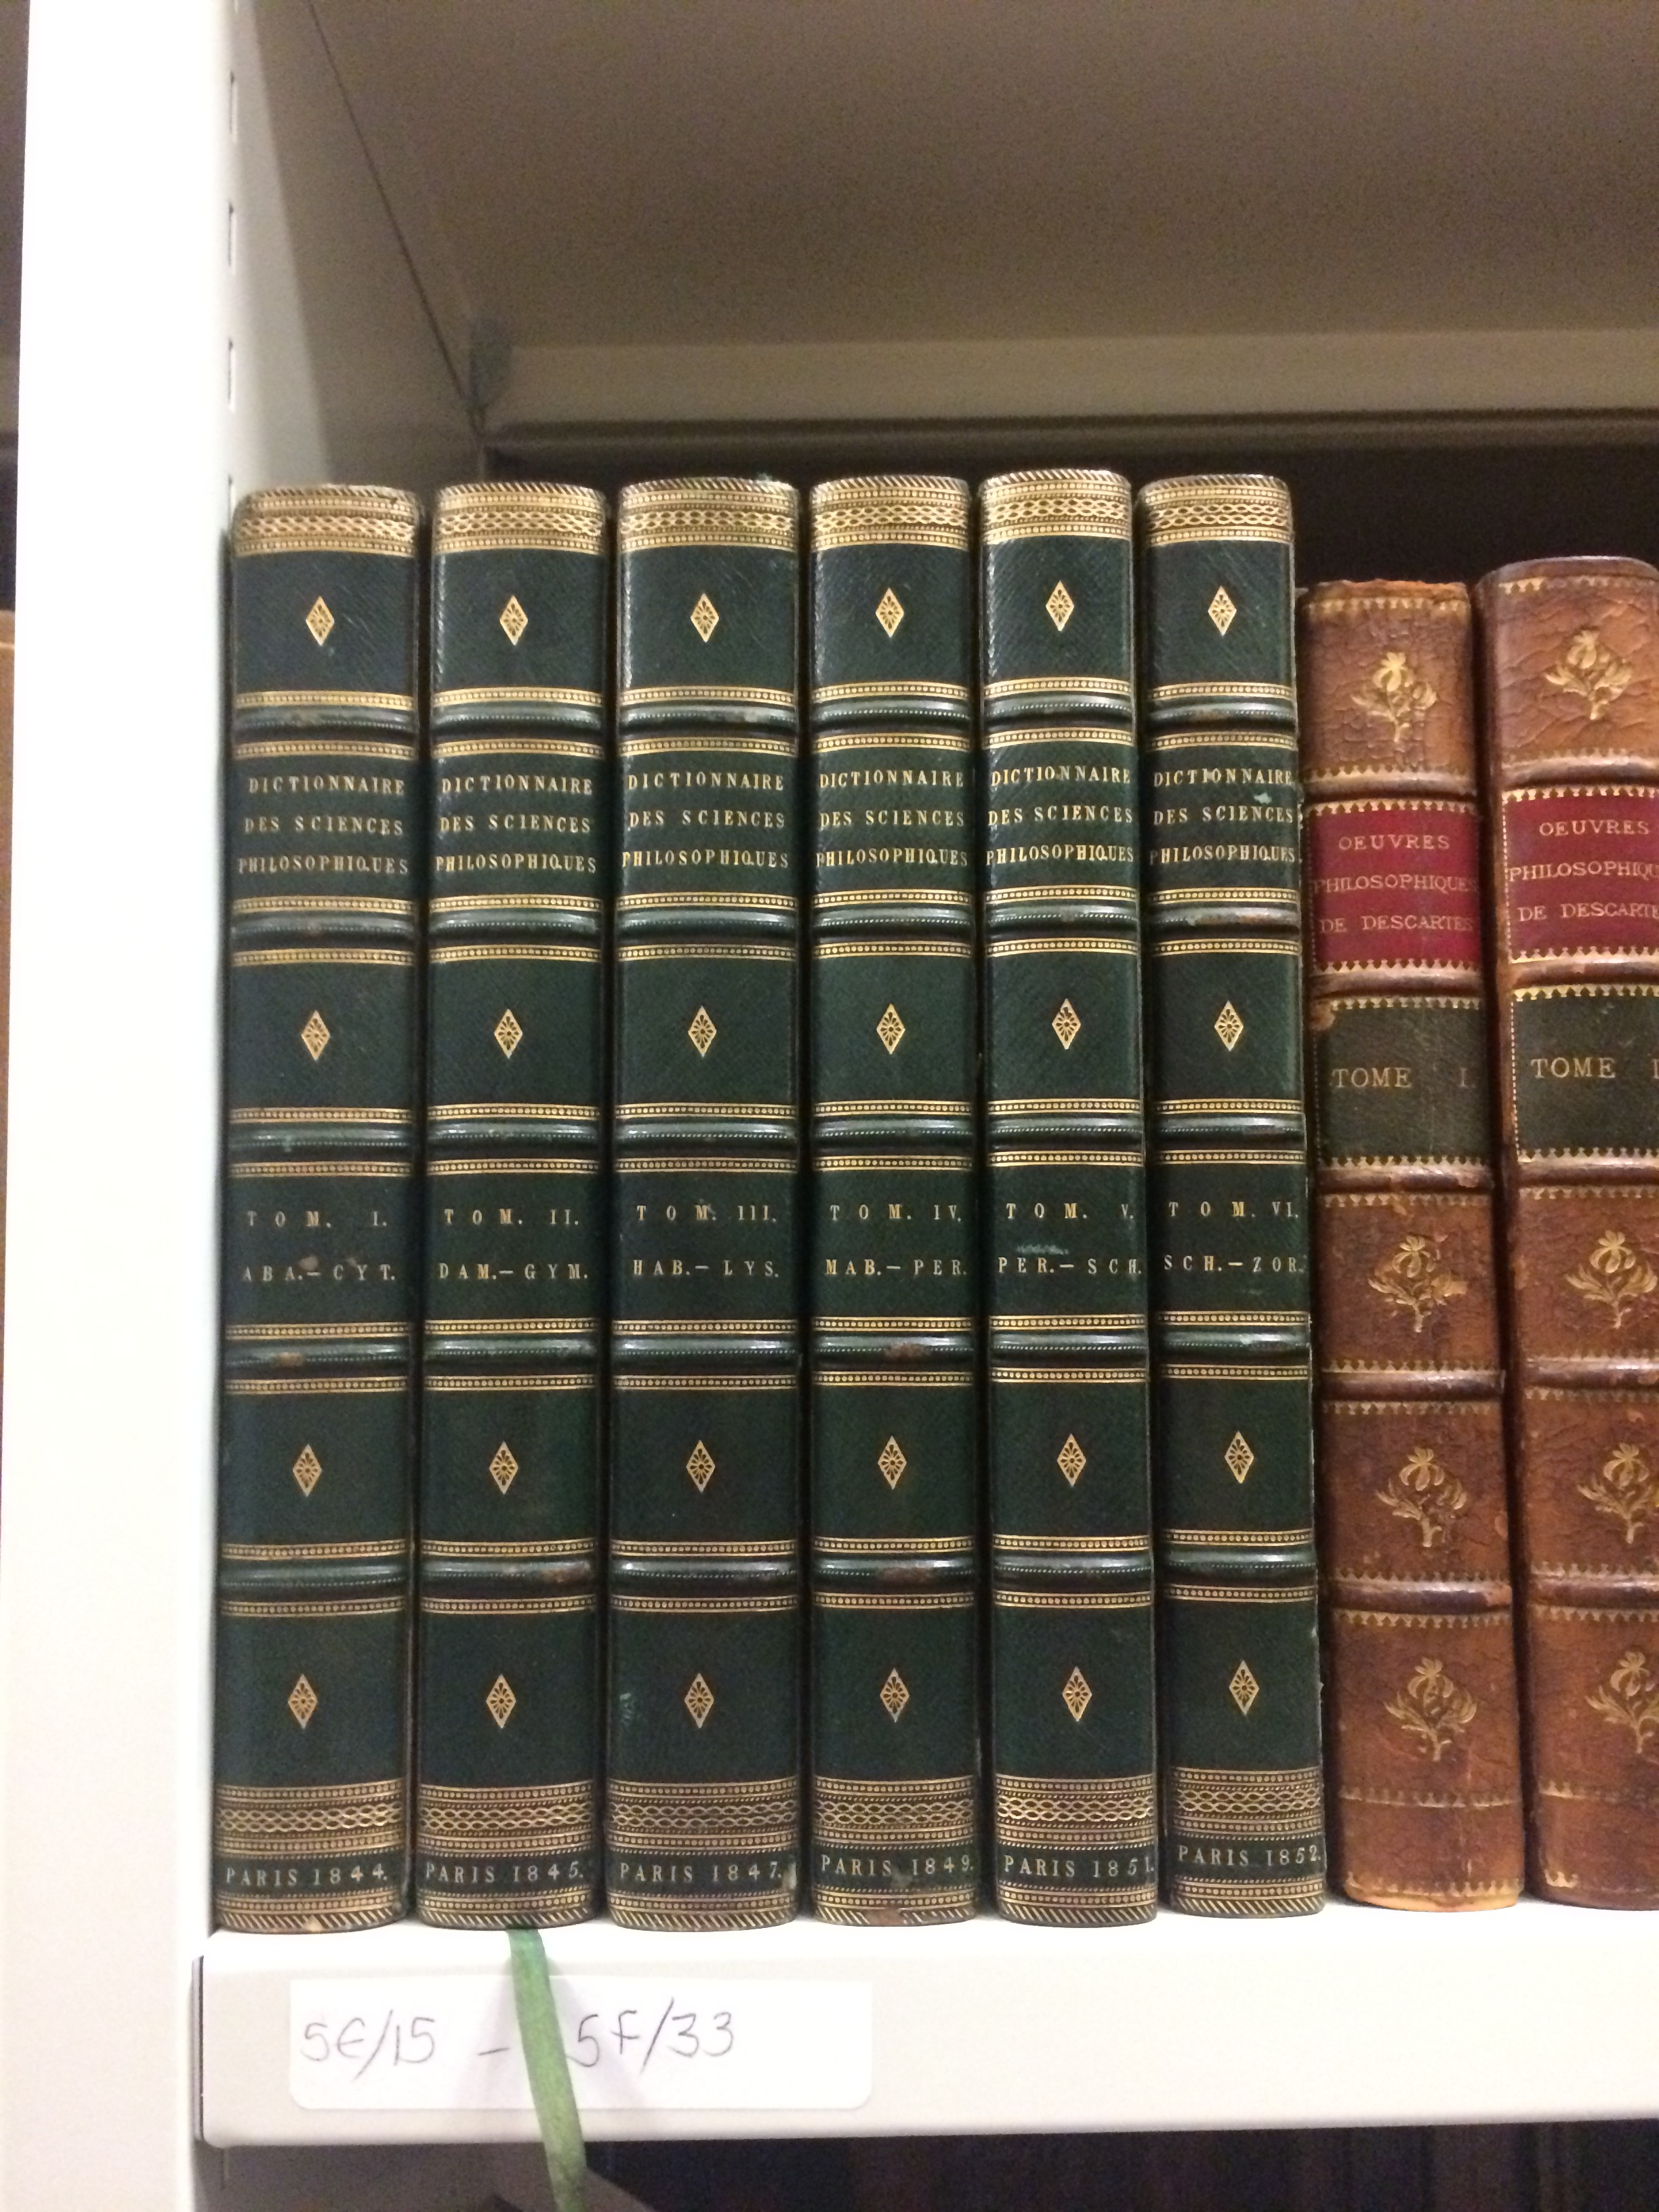 A collection of green books with guilded gold decoration.